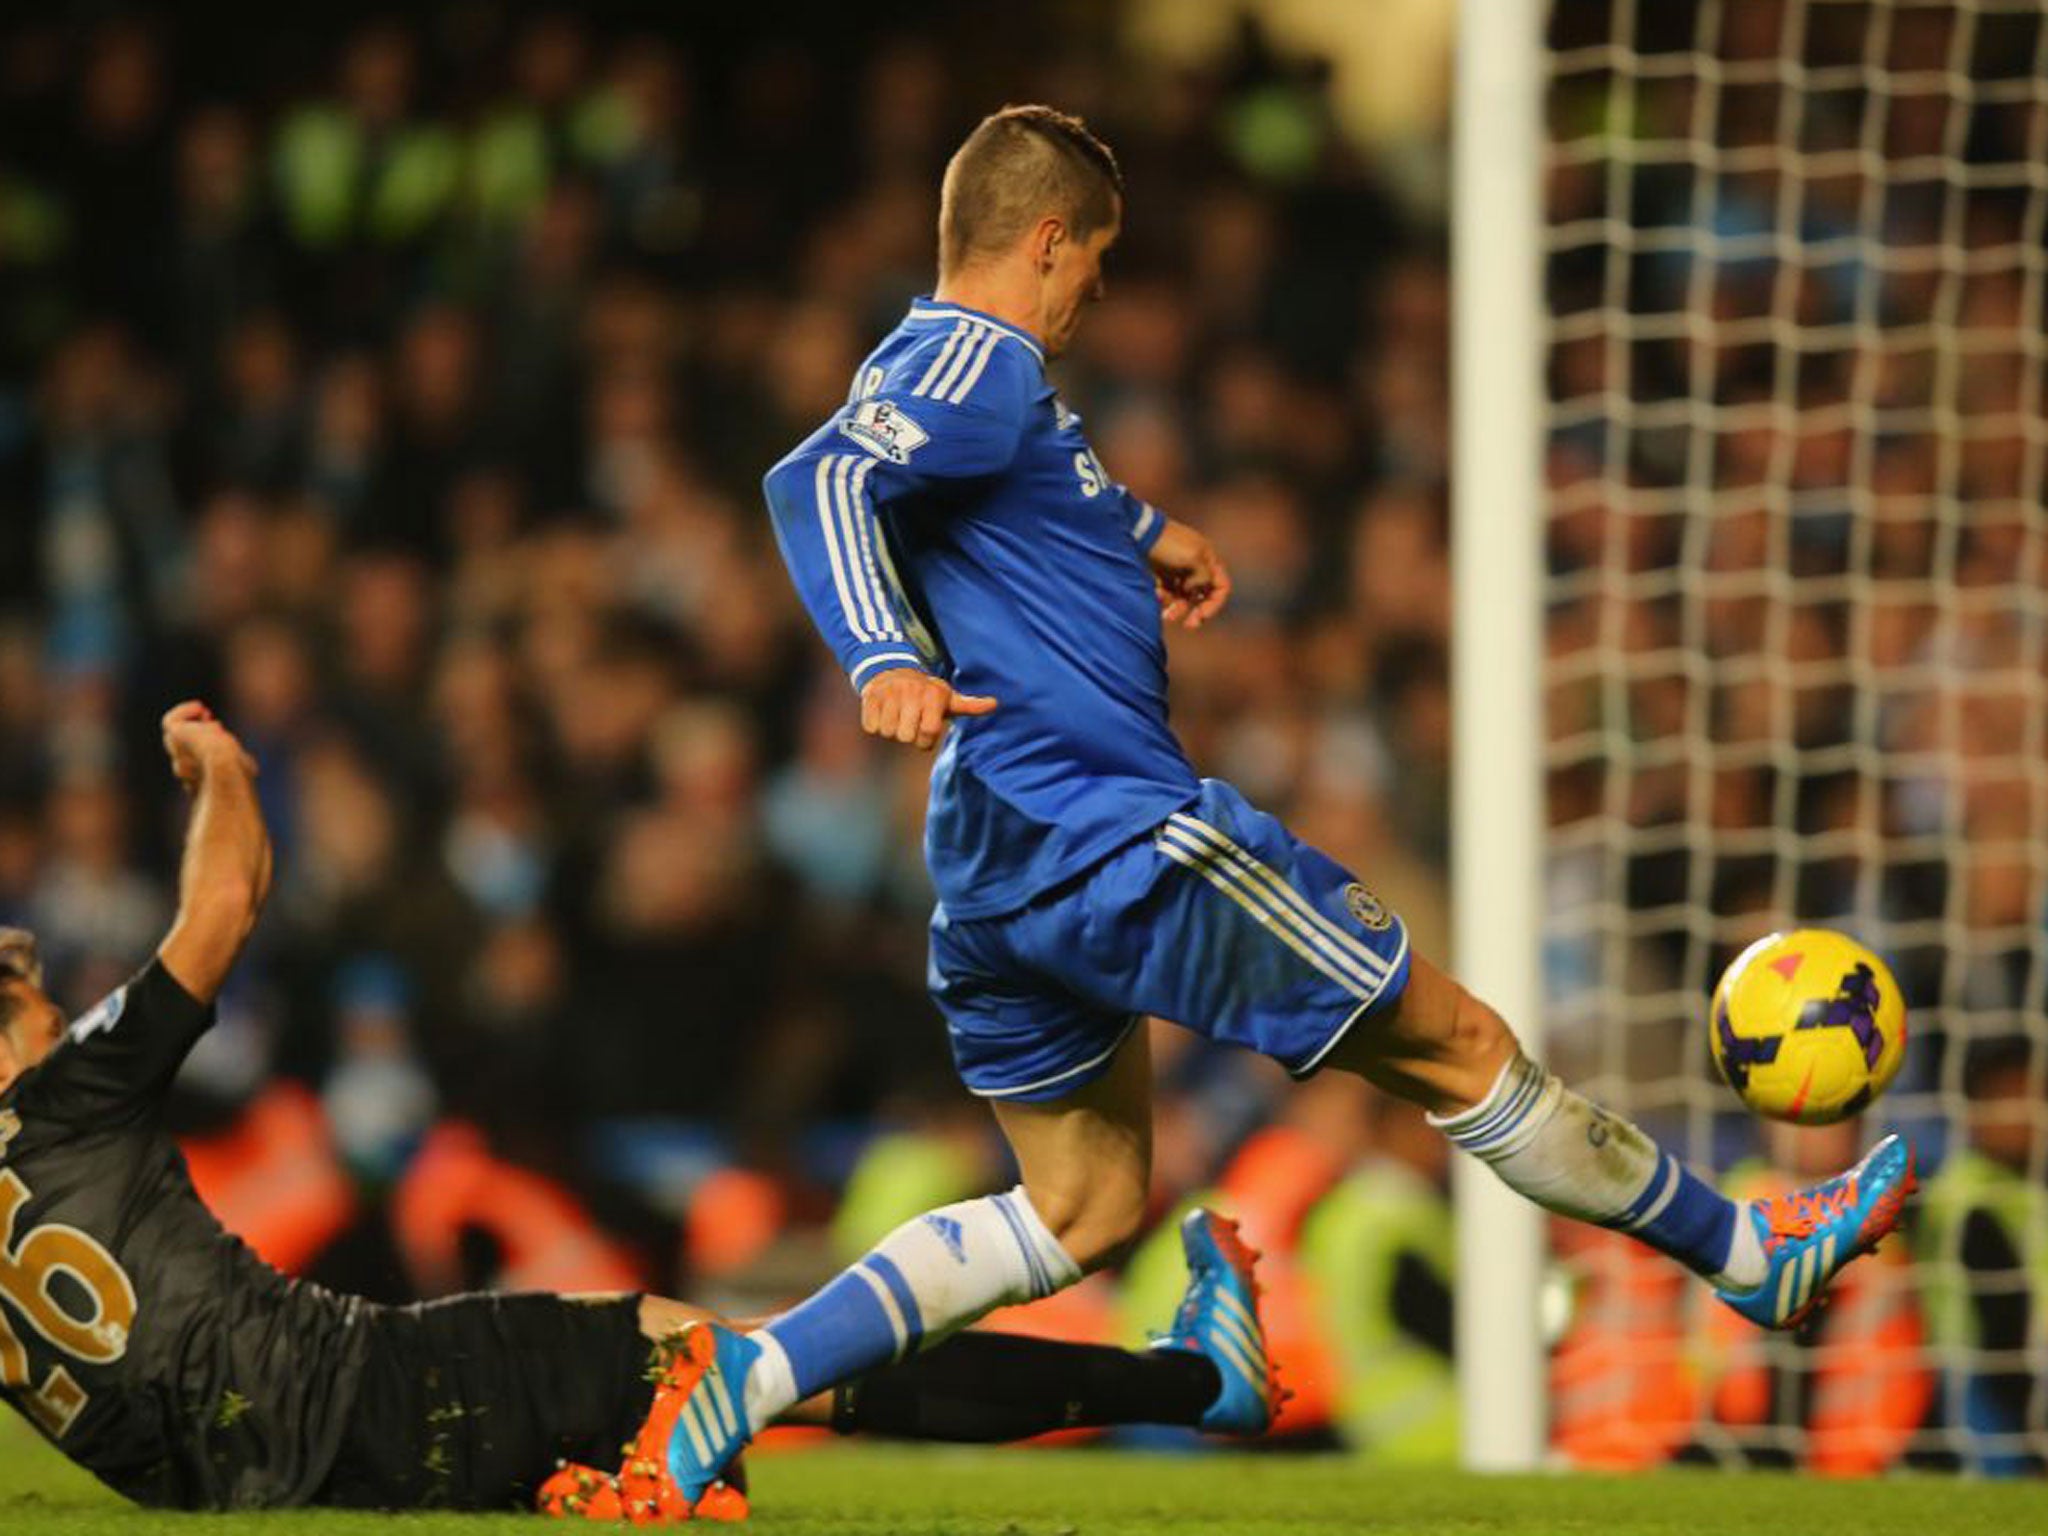 Man City Vs Chelsea F.C.: Timeline of a Thrilling Match  